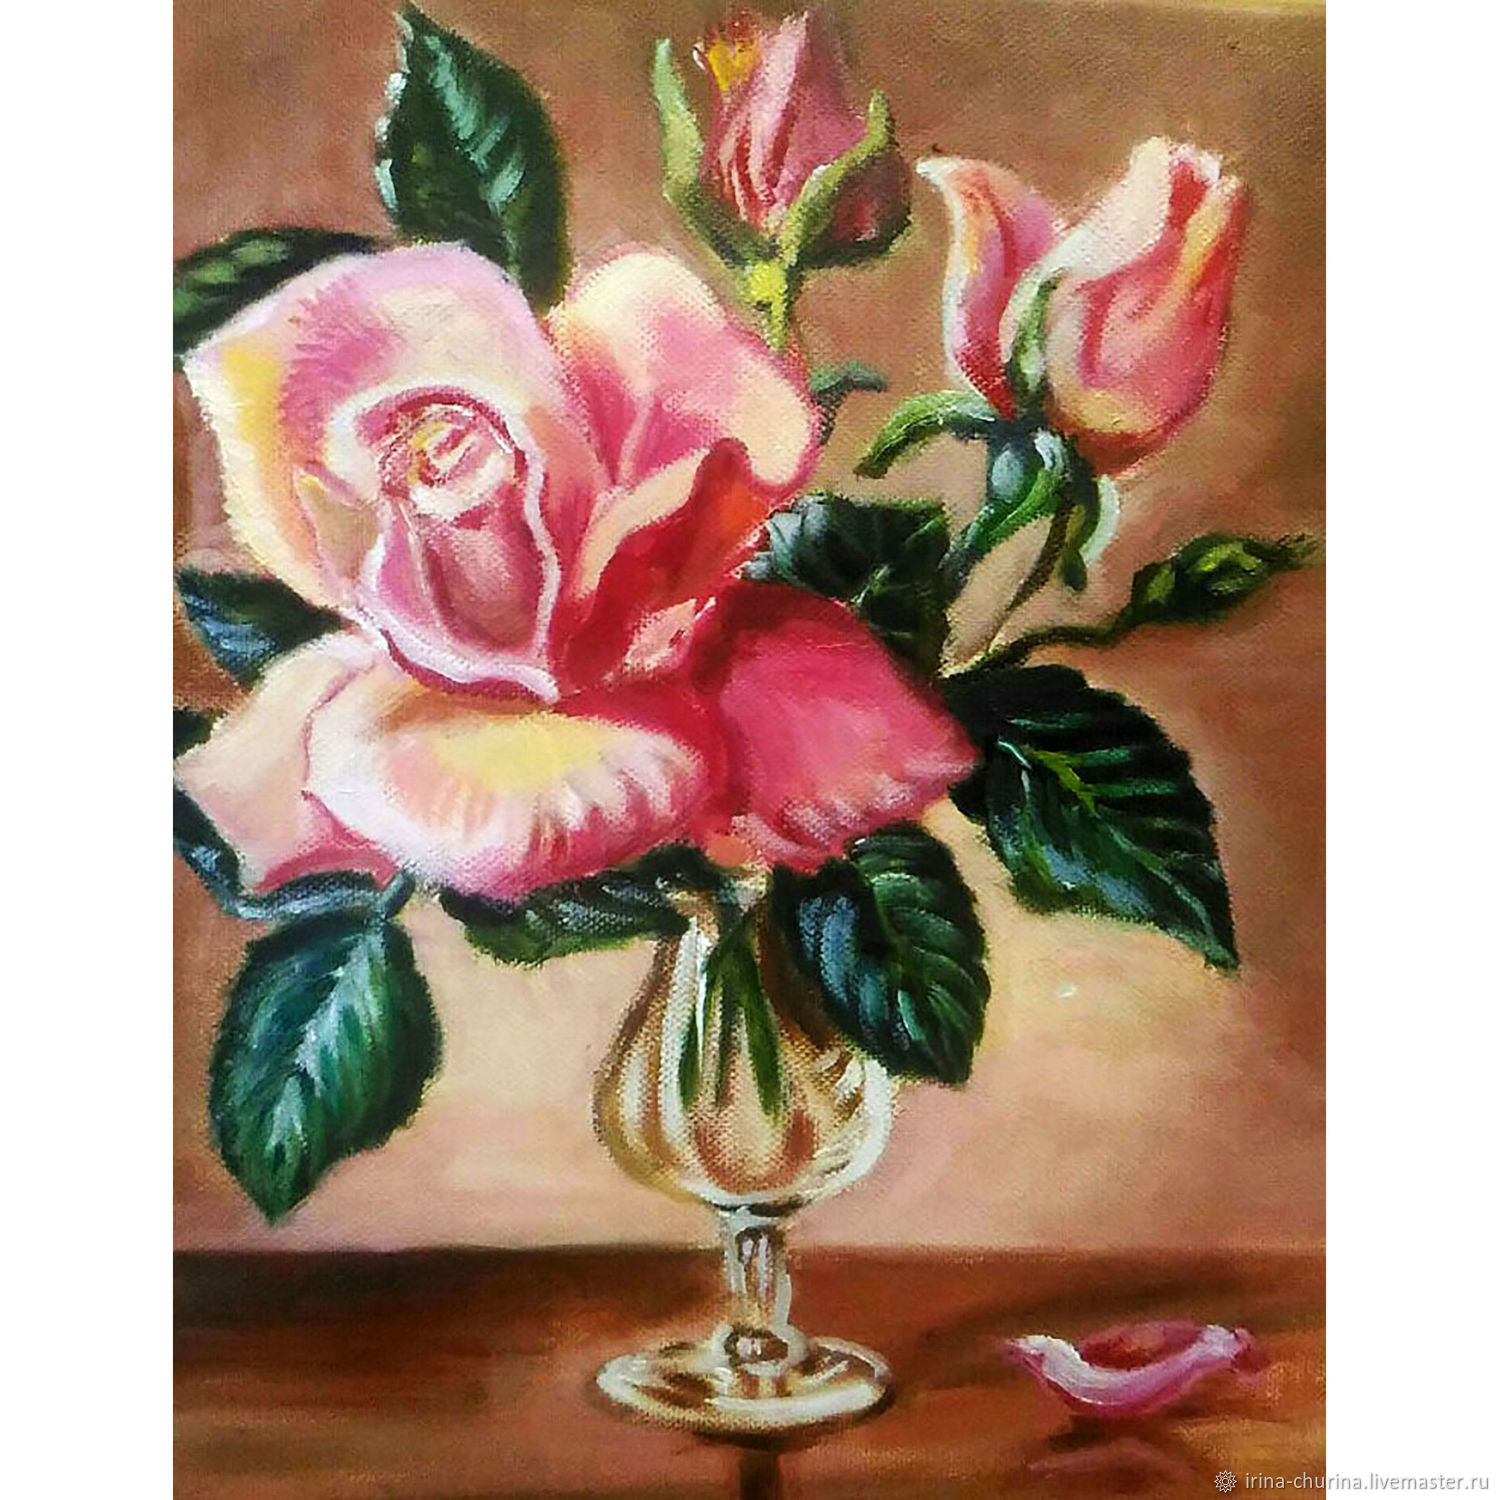 Painting with roses 'A rose in a glass', Pictures, Rostov-on-Don,  Фото №1